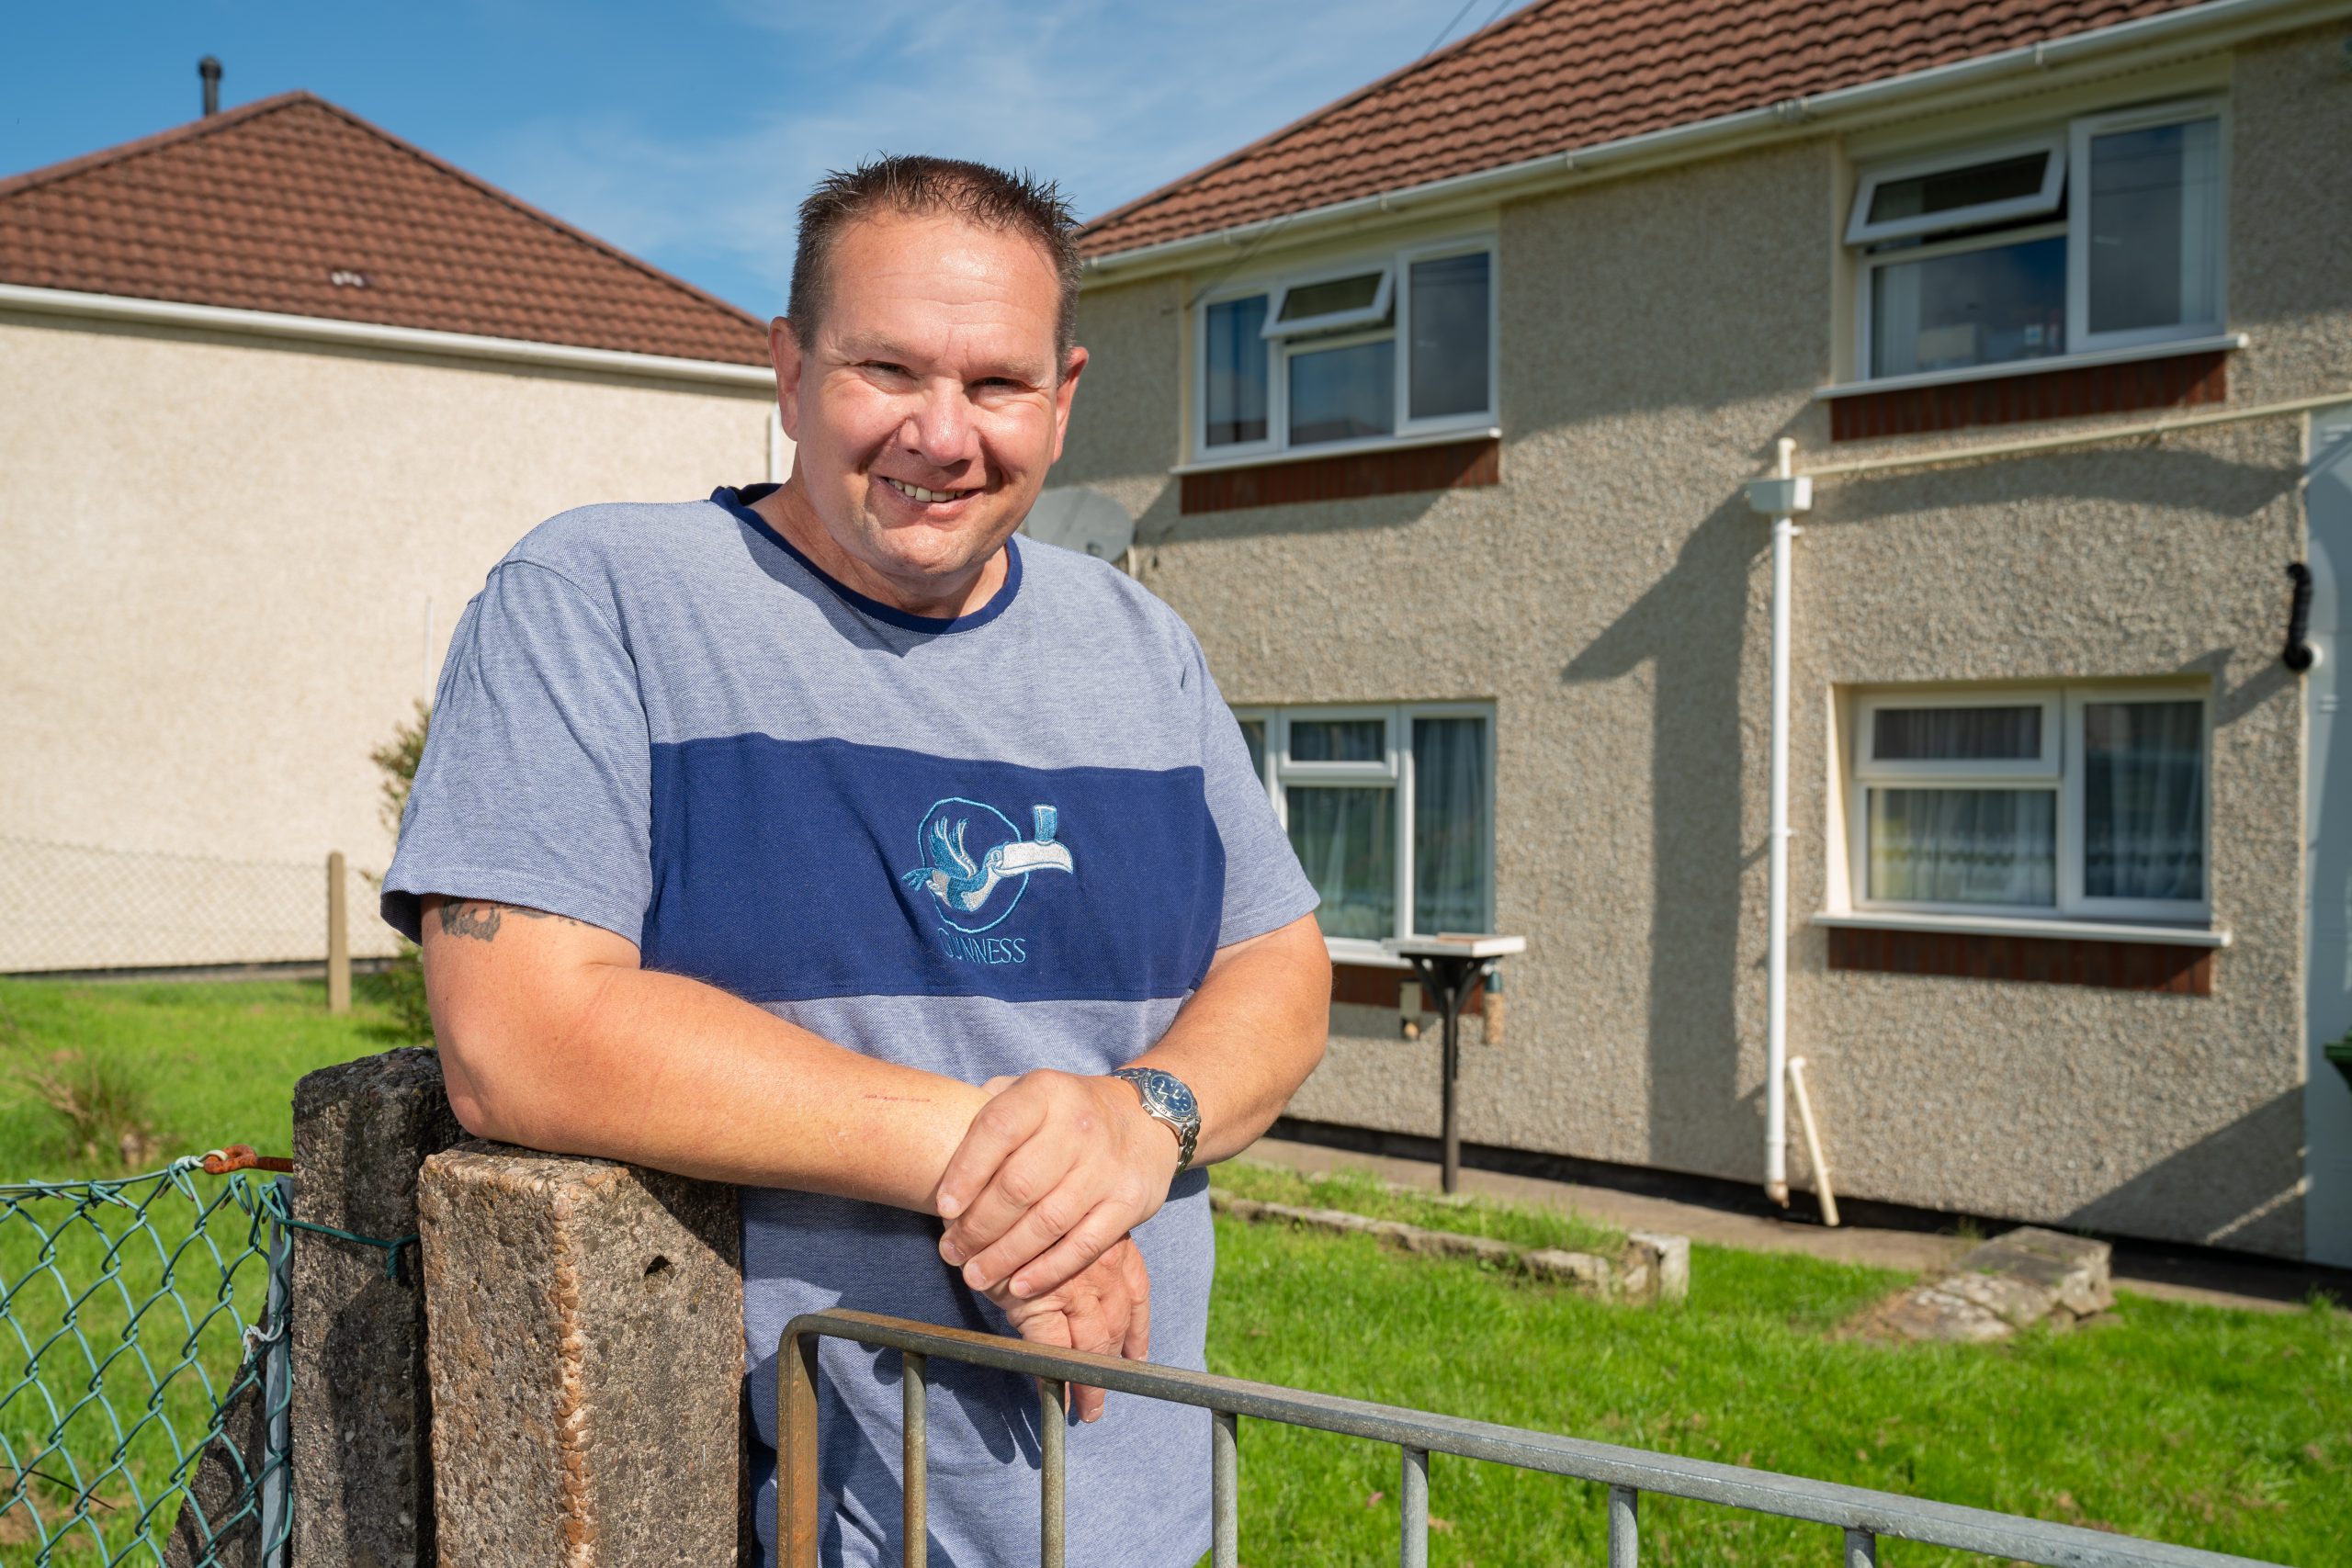 A smiling man leans on a metal gate in front of a suburban house with a well-kept lawn on a sunny day. he is wearing a blue t-shirt with a logo and casual shorts.